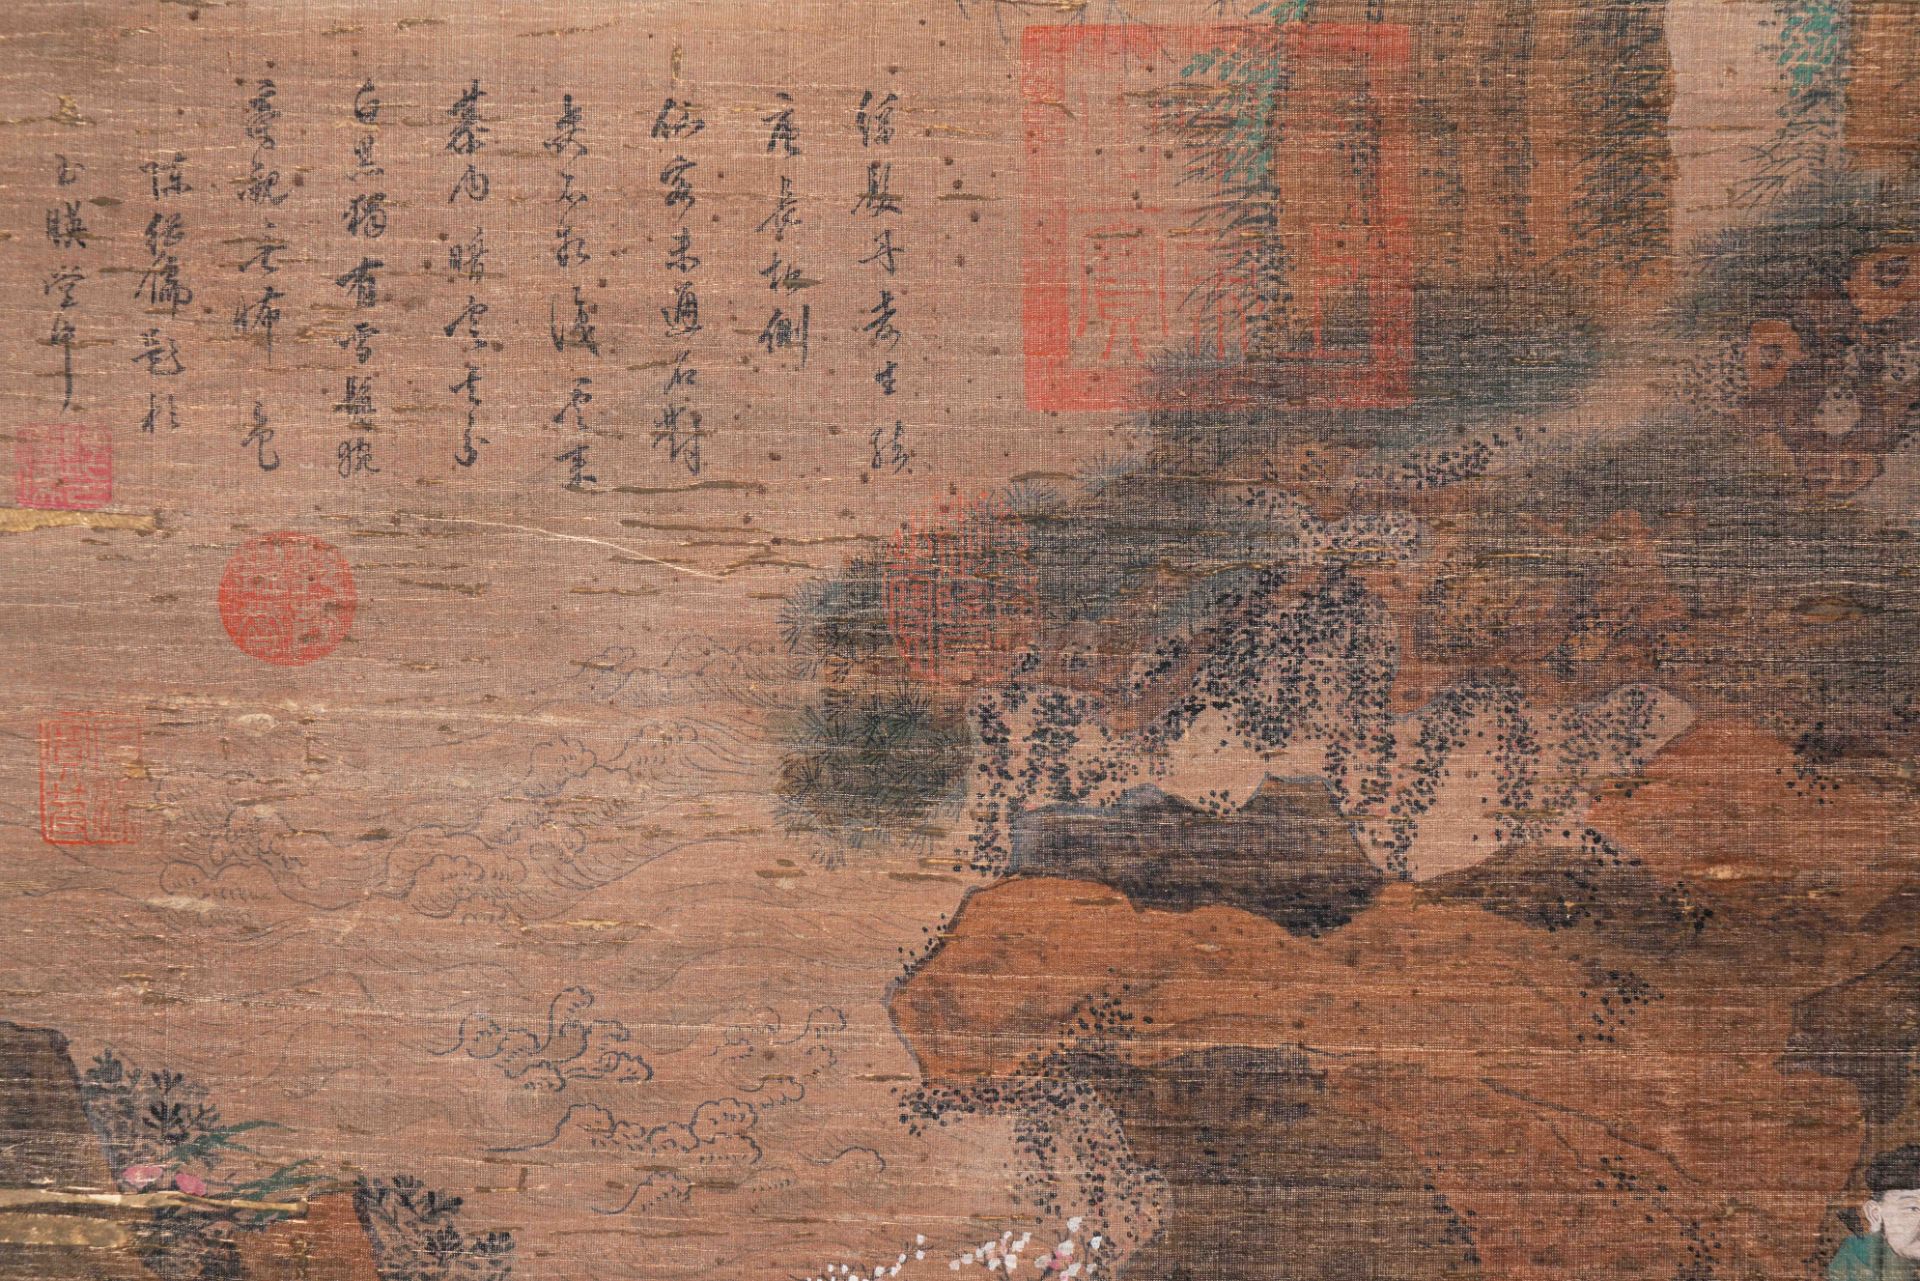 A Chinese Scroll Painting By Zhan Ziyu - Image 6 of 9